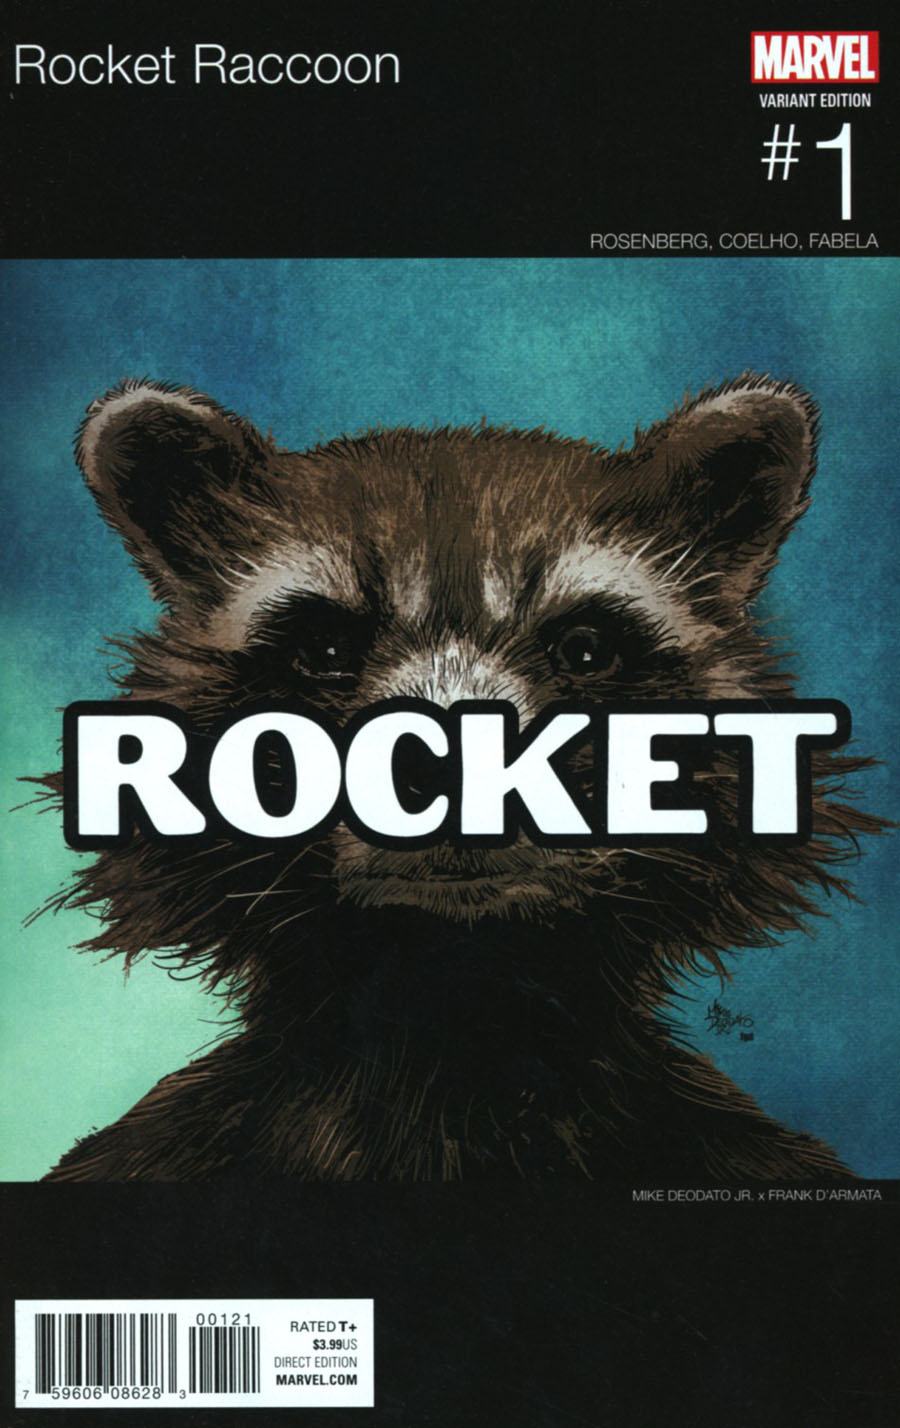 Rocket Raccoon Vol 3 #1 Cover B Variant Mike Deodato Jr Marvel Hip-Hop Cover (Marvel Now Tie-In)